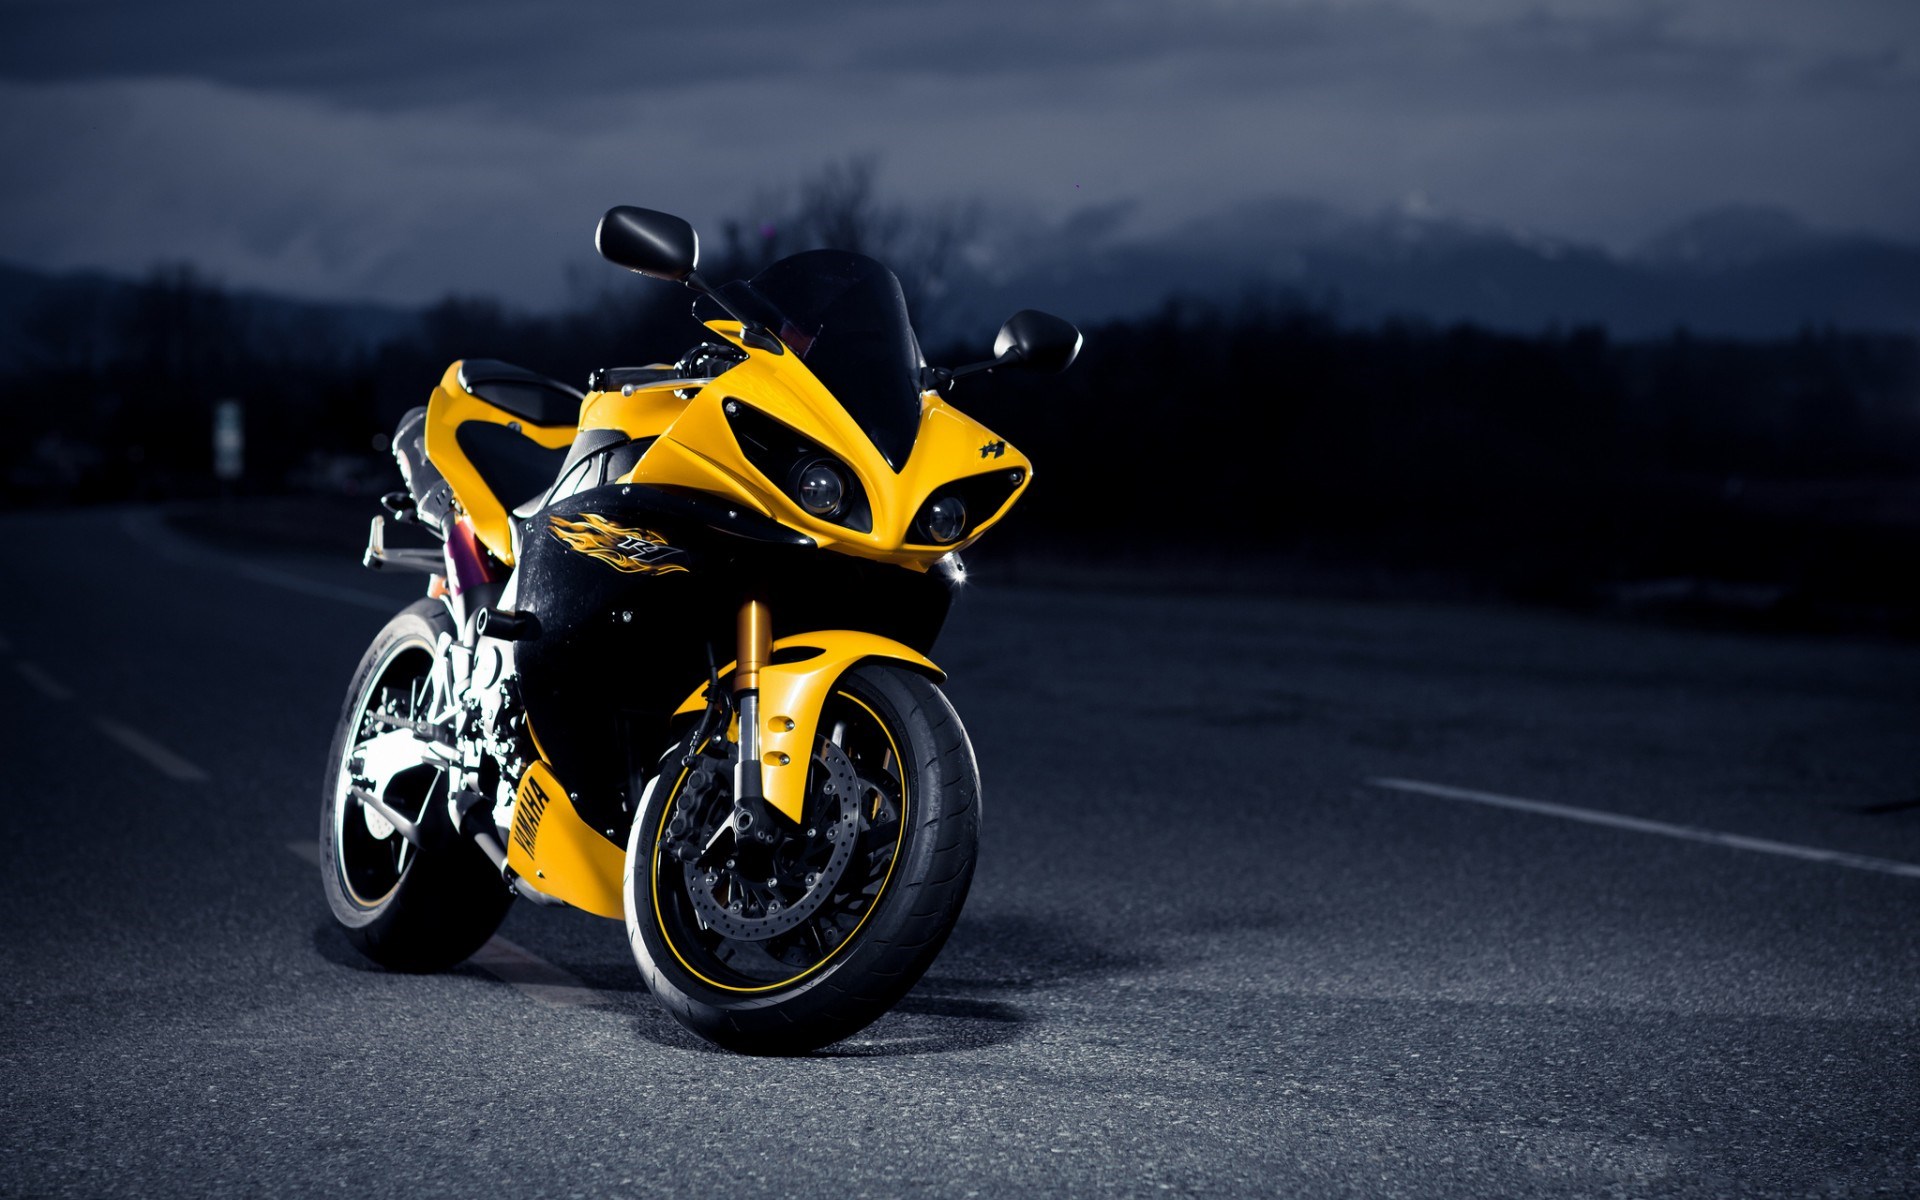 Superbike HD Wallpapers - HD Wallpapers Backgrounds of Your Choice